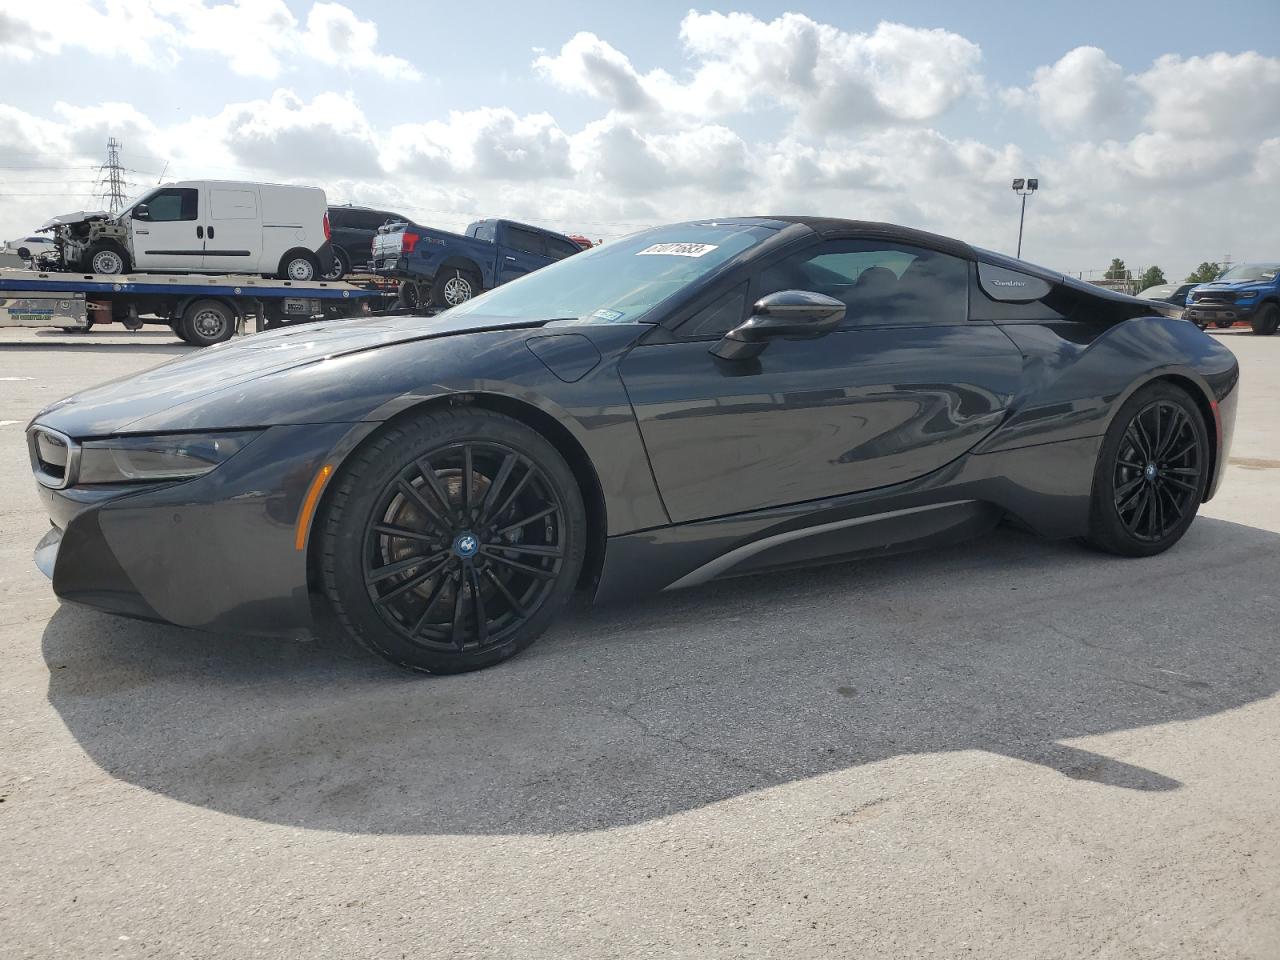 2019 BMW i8 Roadster For Sale in Houston, TX